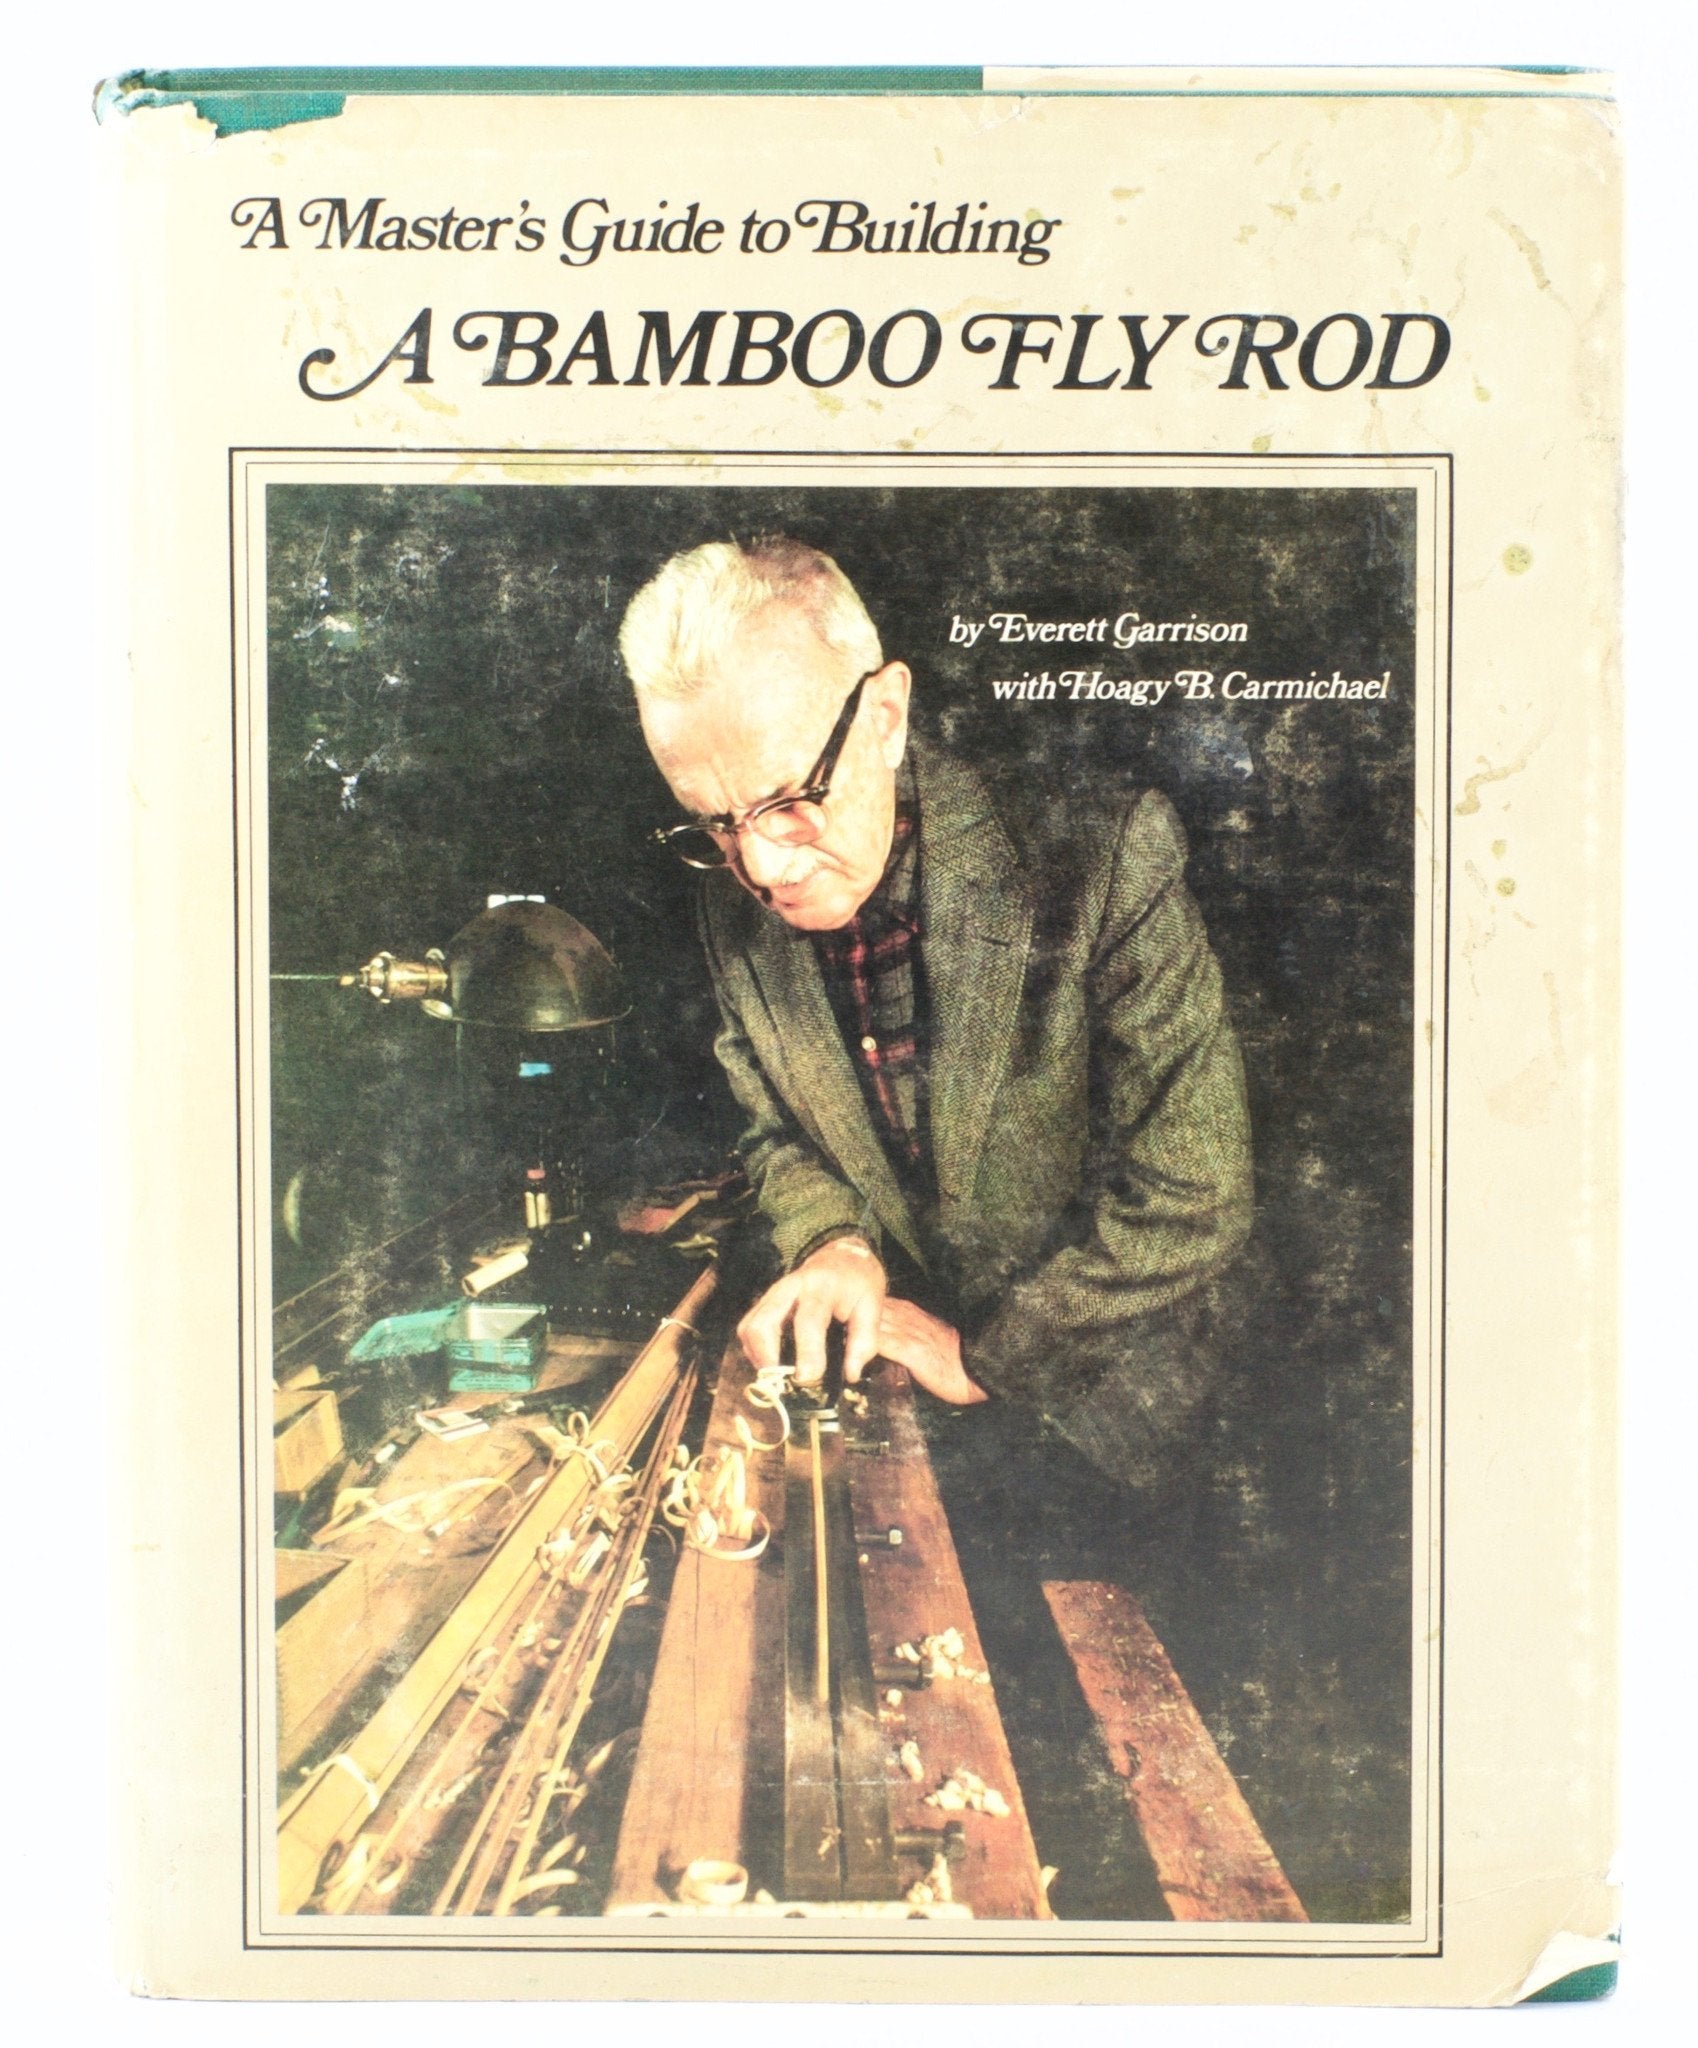 Carmichael / Garrison - A Master's Guide to Building a Bamboo Fly Rod 